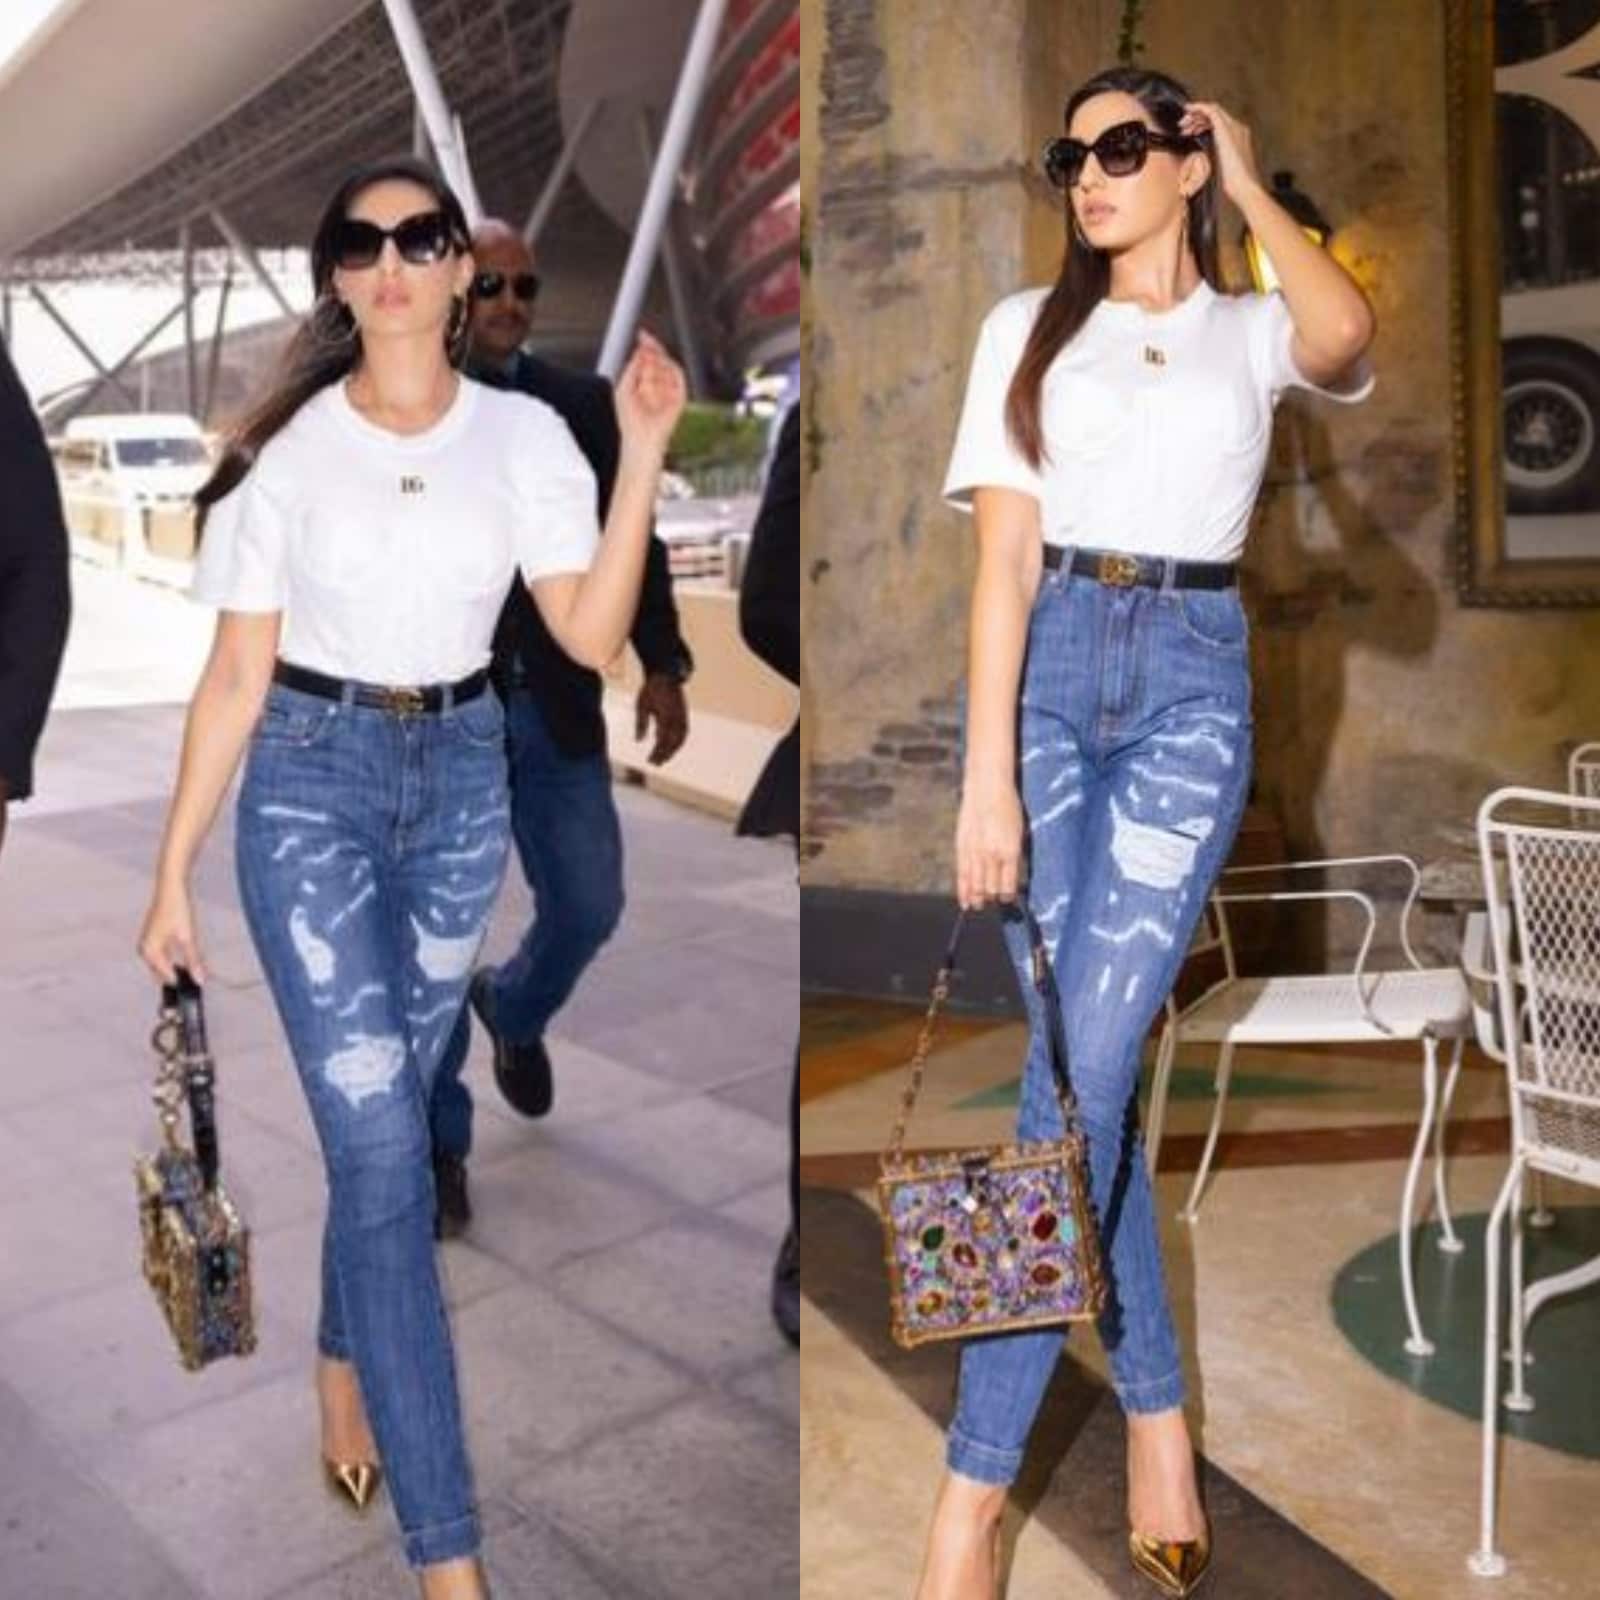 Nora Fatehi Sets Temperature Soaring in White Top, Denim as She Strikes  Most Stylish Pose, See Pics - News18